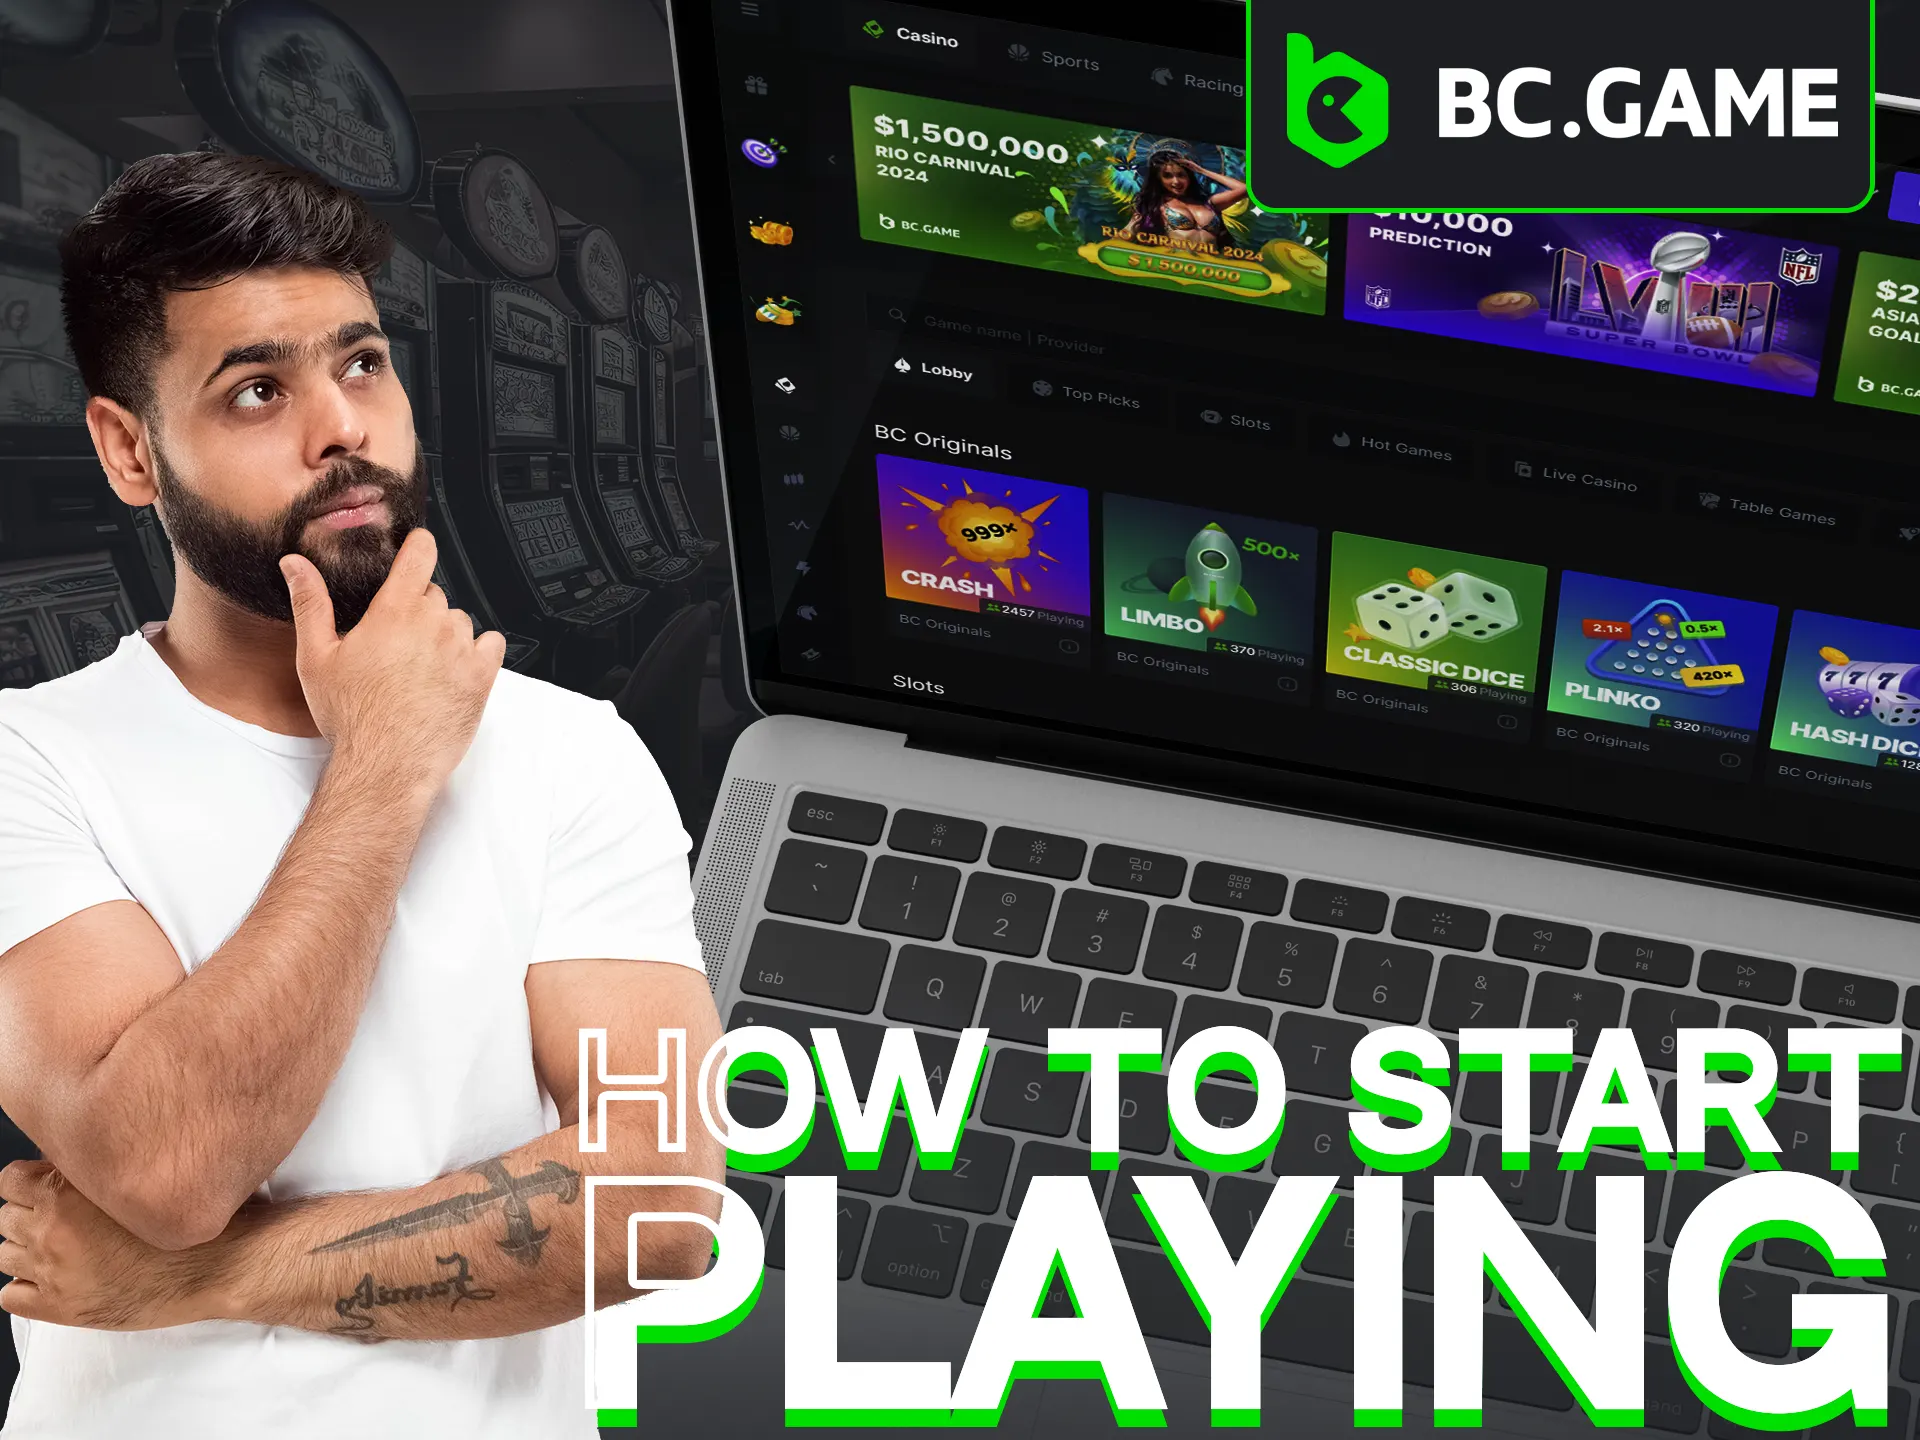 Begin playing at BC Game Casino with simple steps.